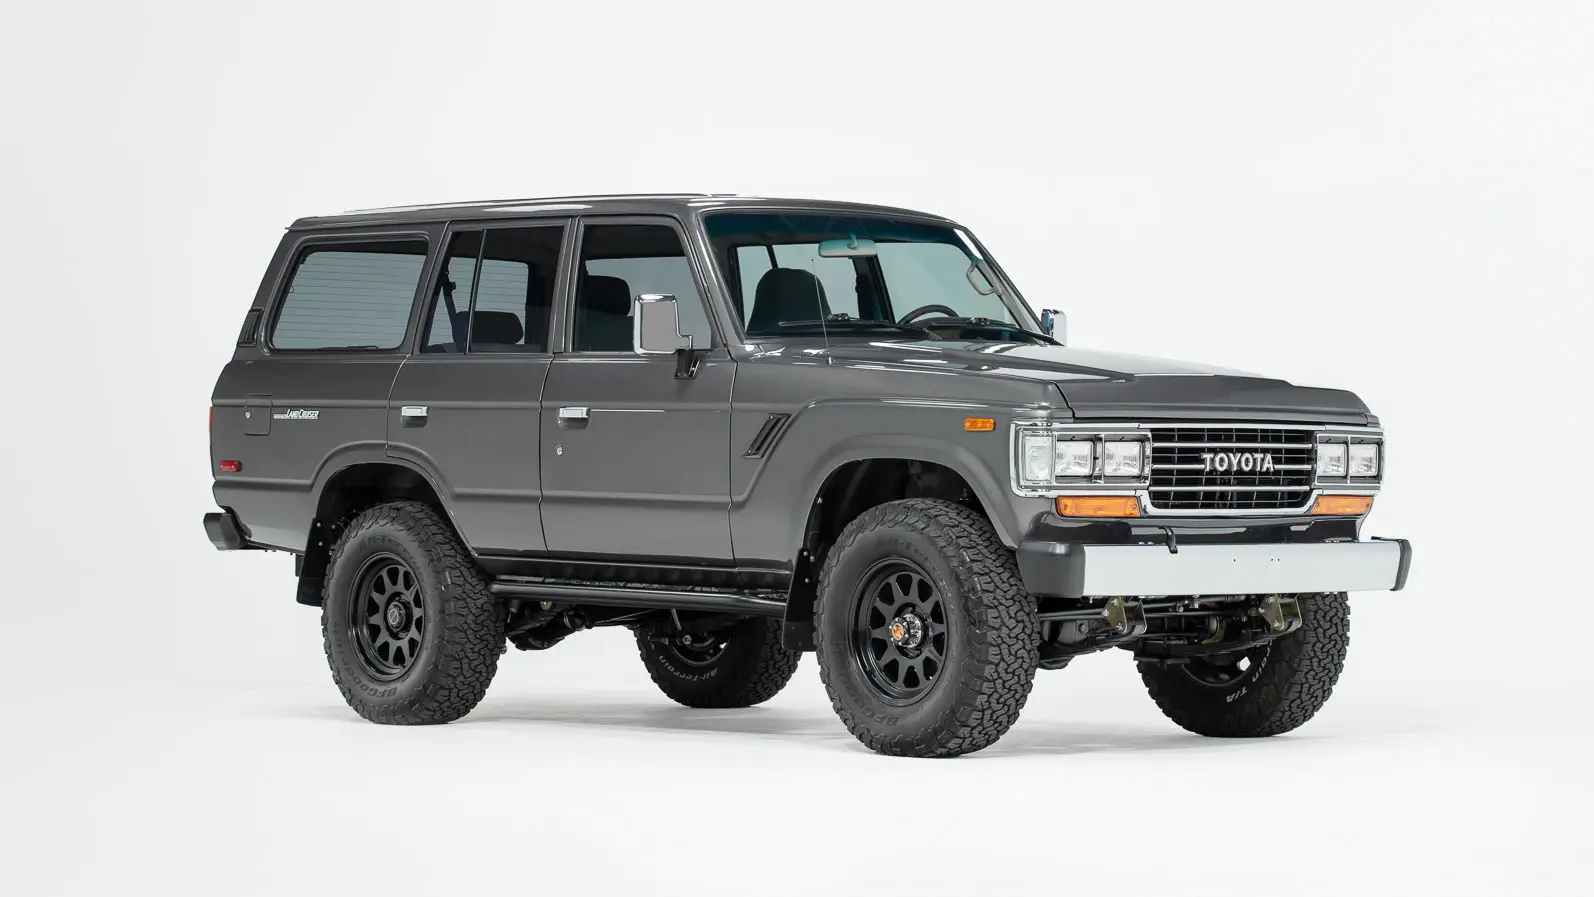 This Classic Land Cruiser Wants to be a Porsche